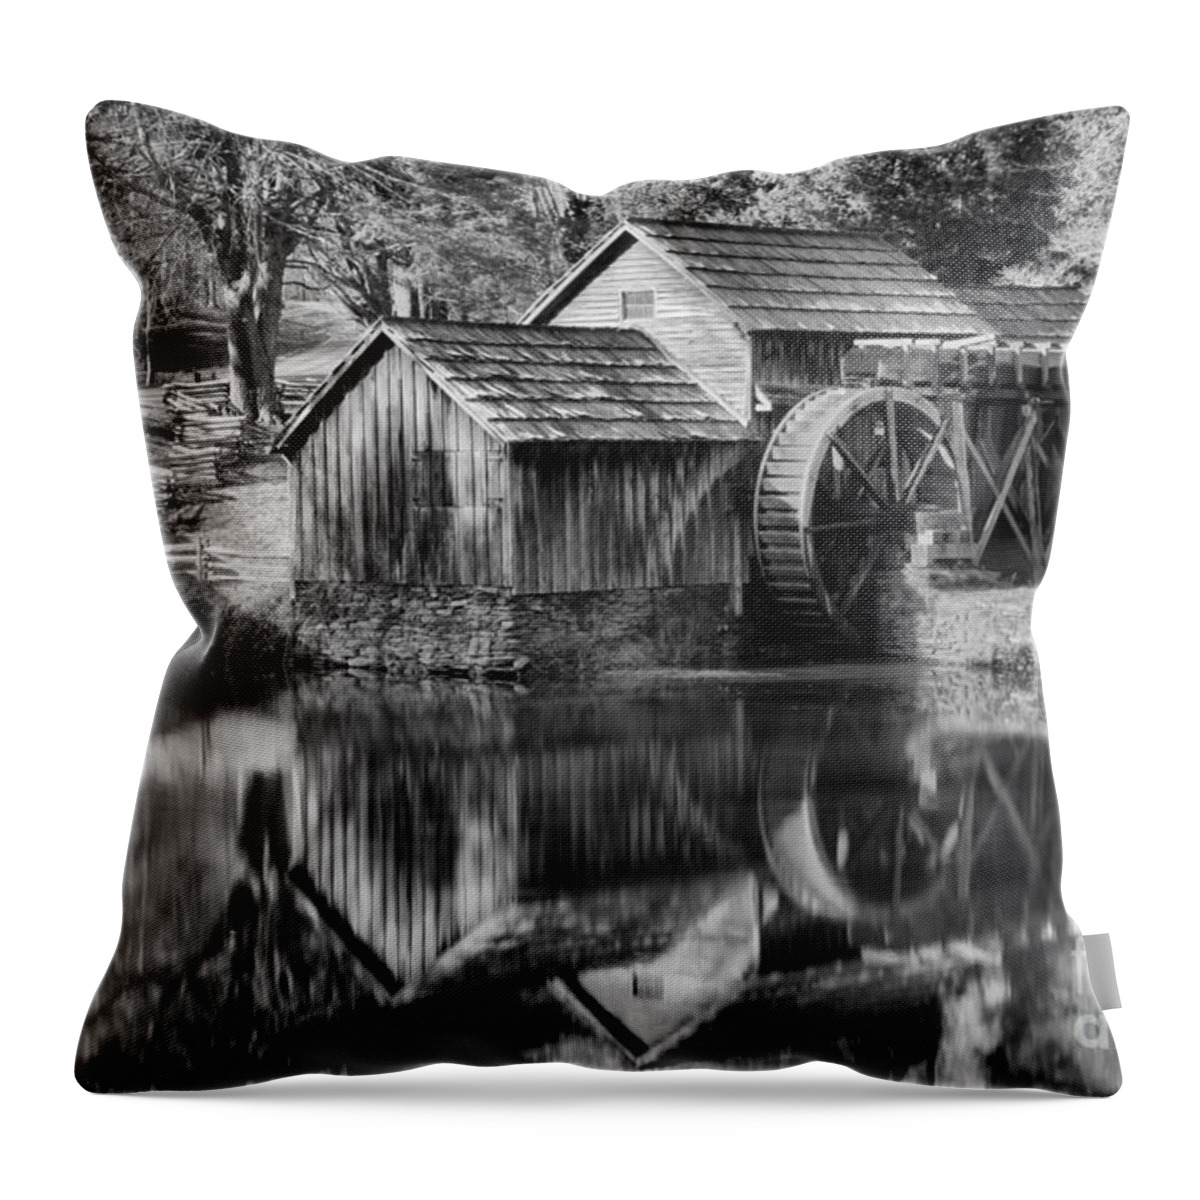 Mabry Mill Black And White Throw Pillow featuring the photograph Black And White Reflections Of The Mabry Mill by Adam Jewell